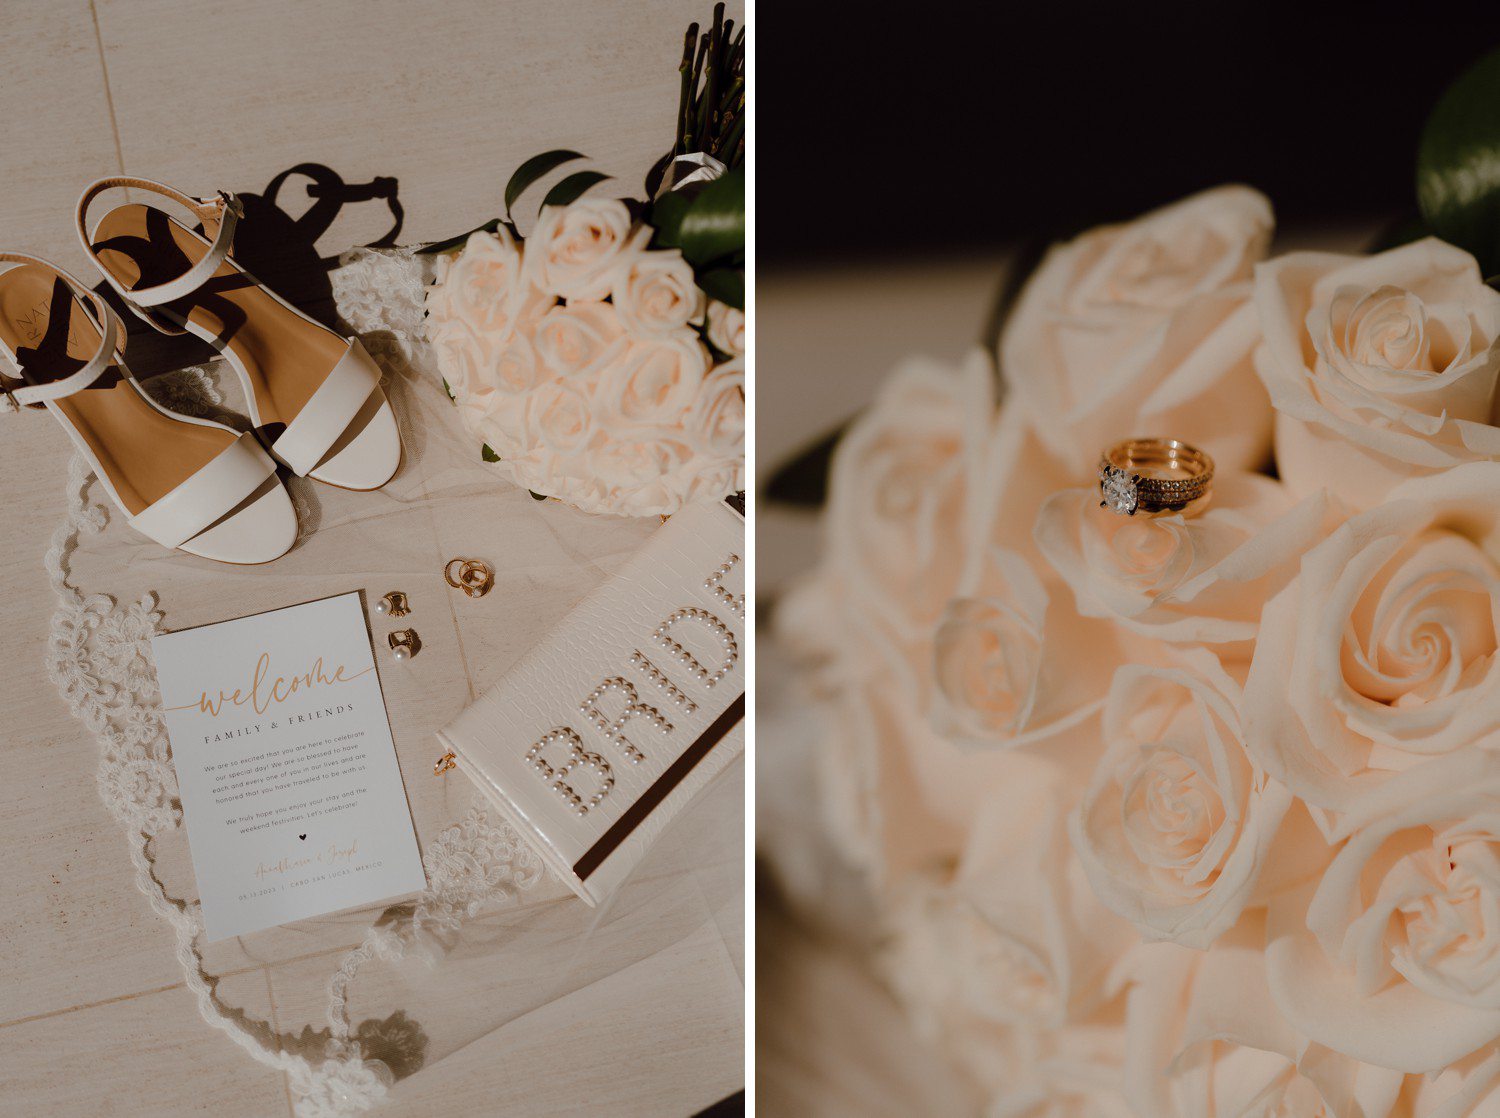 Bridal wedding day details with shoes, bouquets, and ring. 